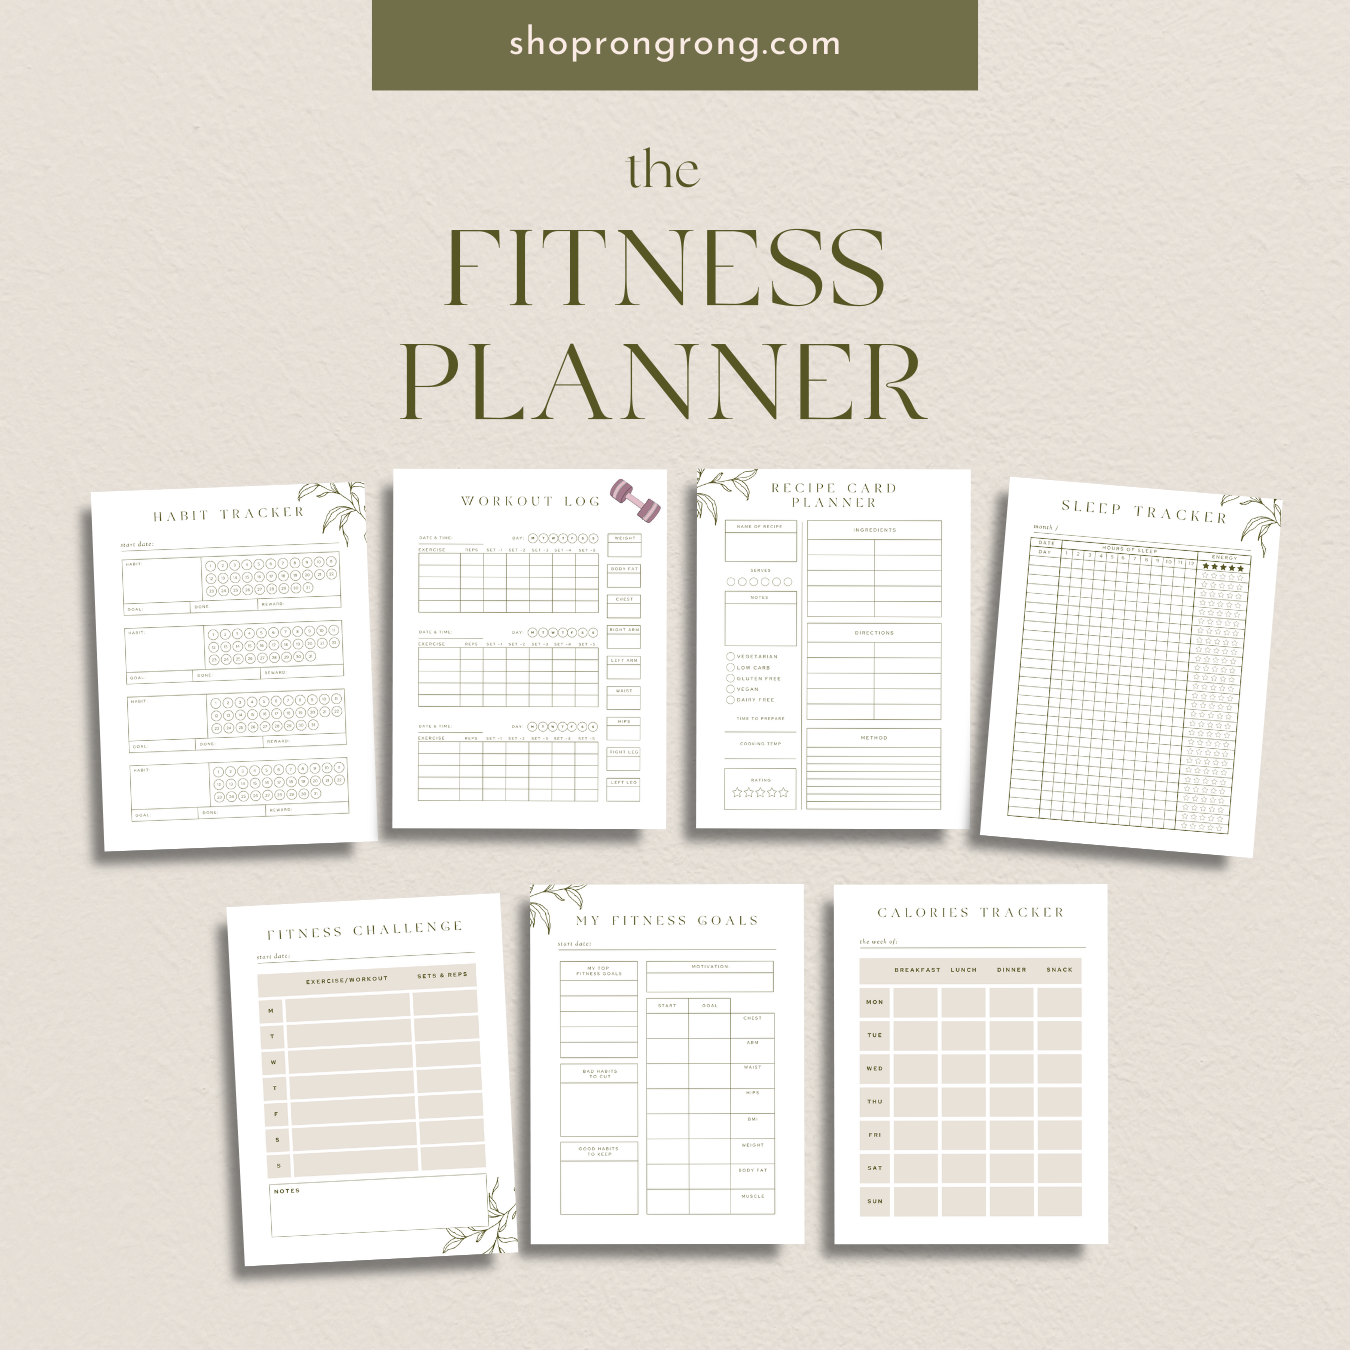 Shop Rongrong Fitness Planner for Goodnotes